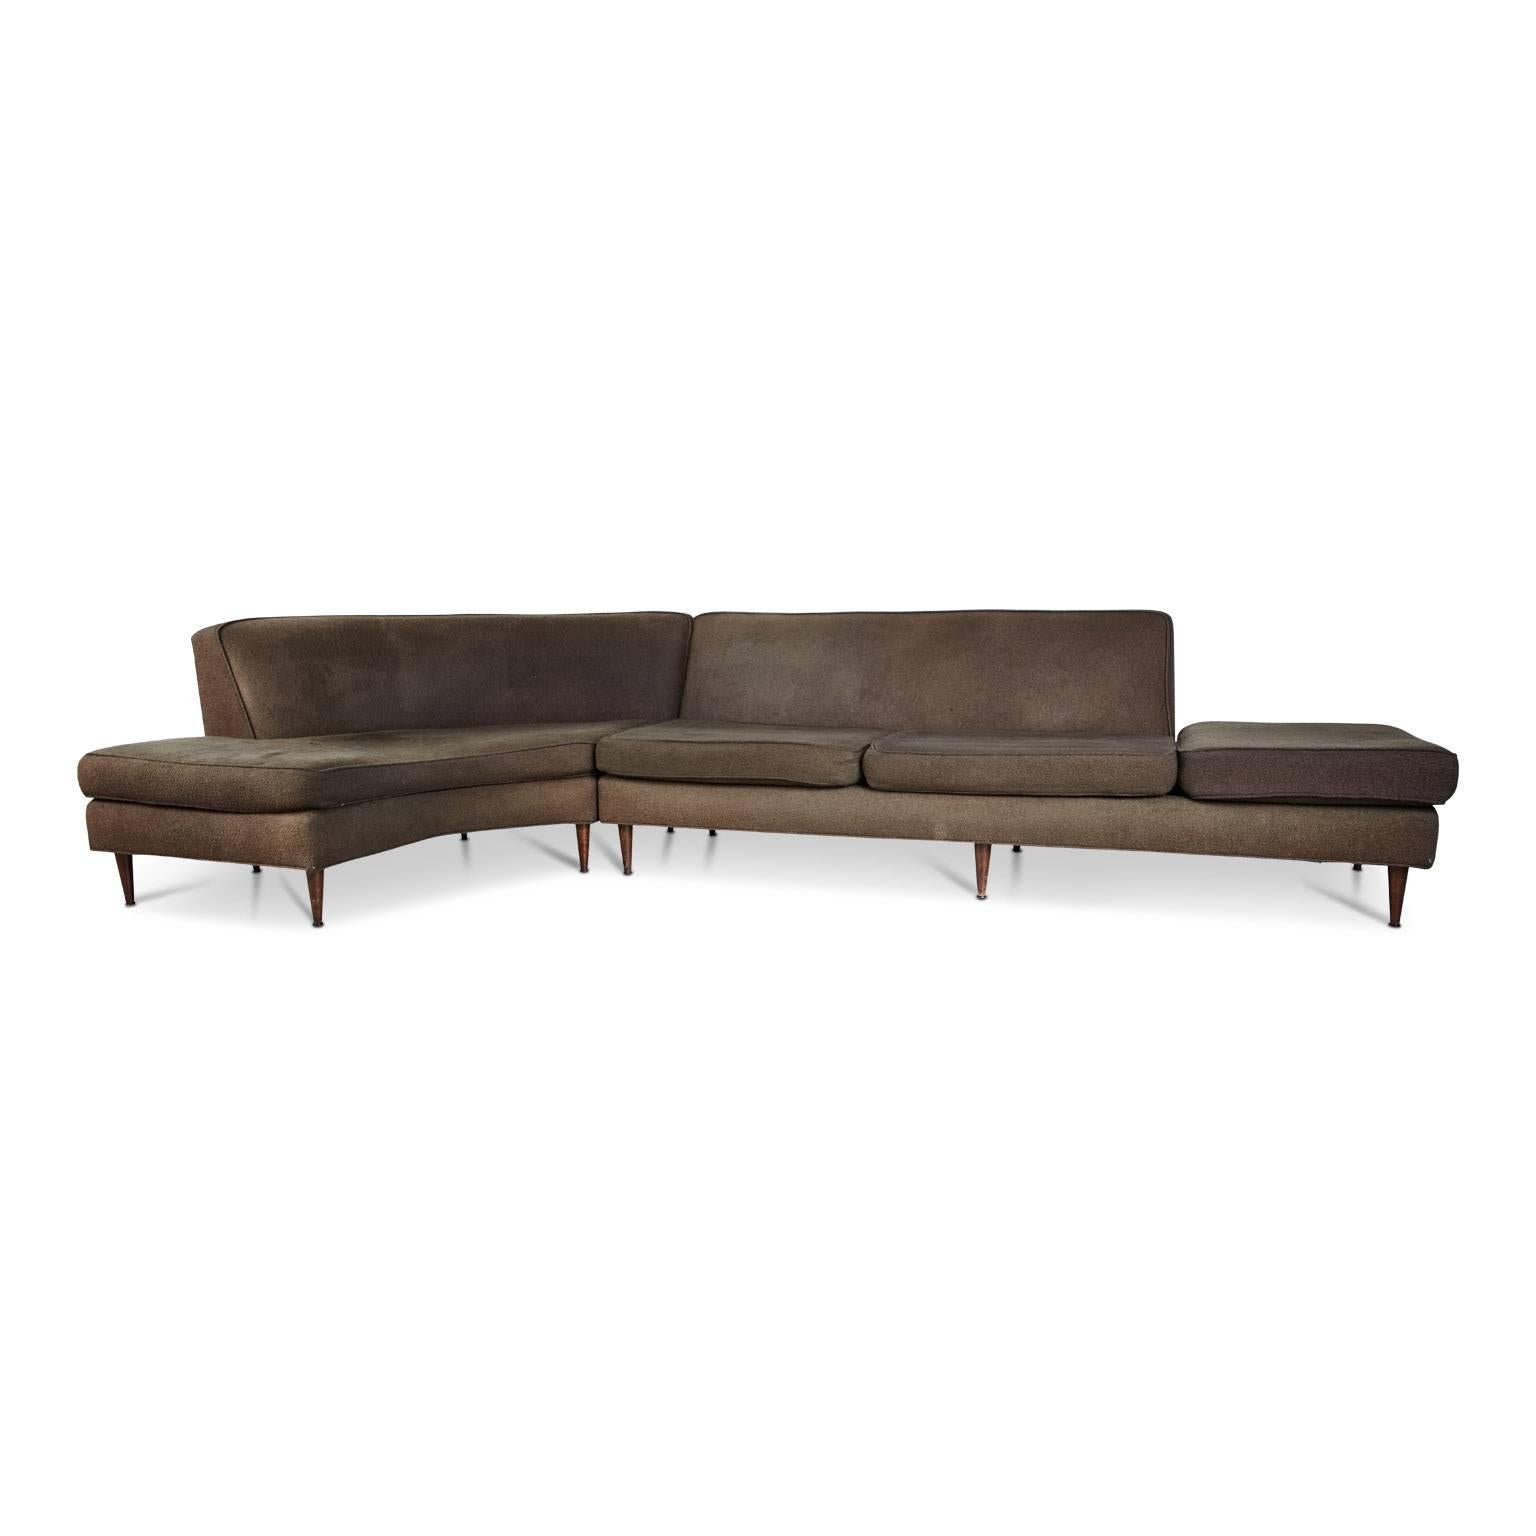 Gracefully curved sectional attributed to Harvey Probber, illustrated by the designer's innovative modern style and use of understated contemporary lines. Paralleled in this sofa is his application of flexibility of function and use of independent